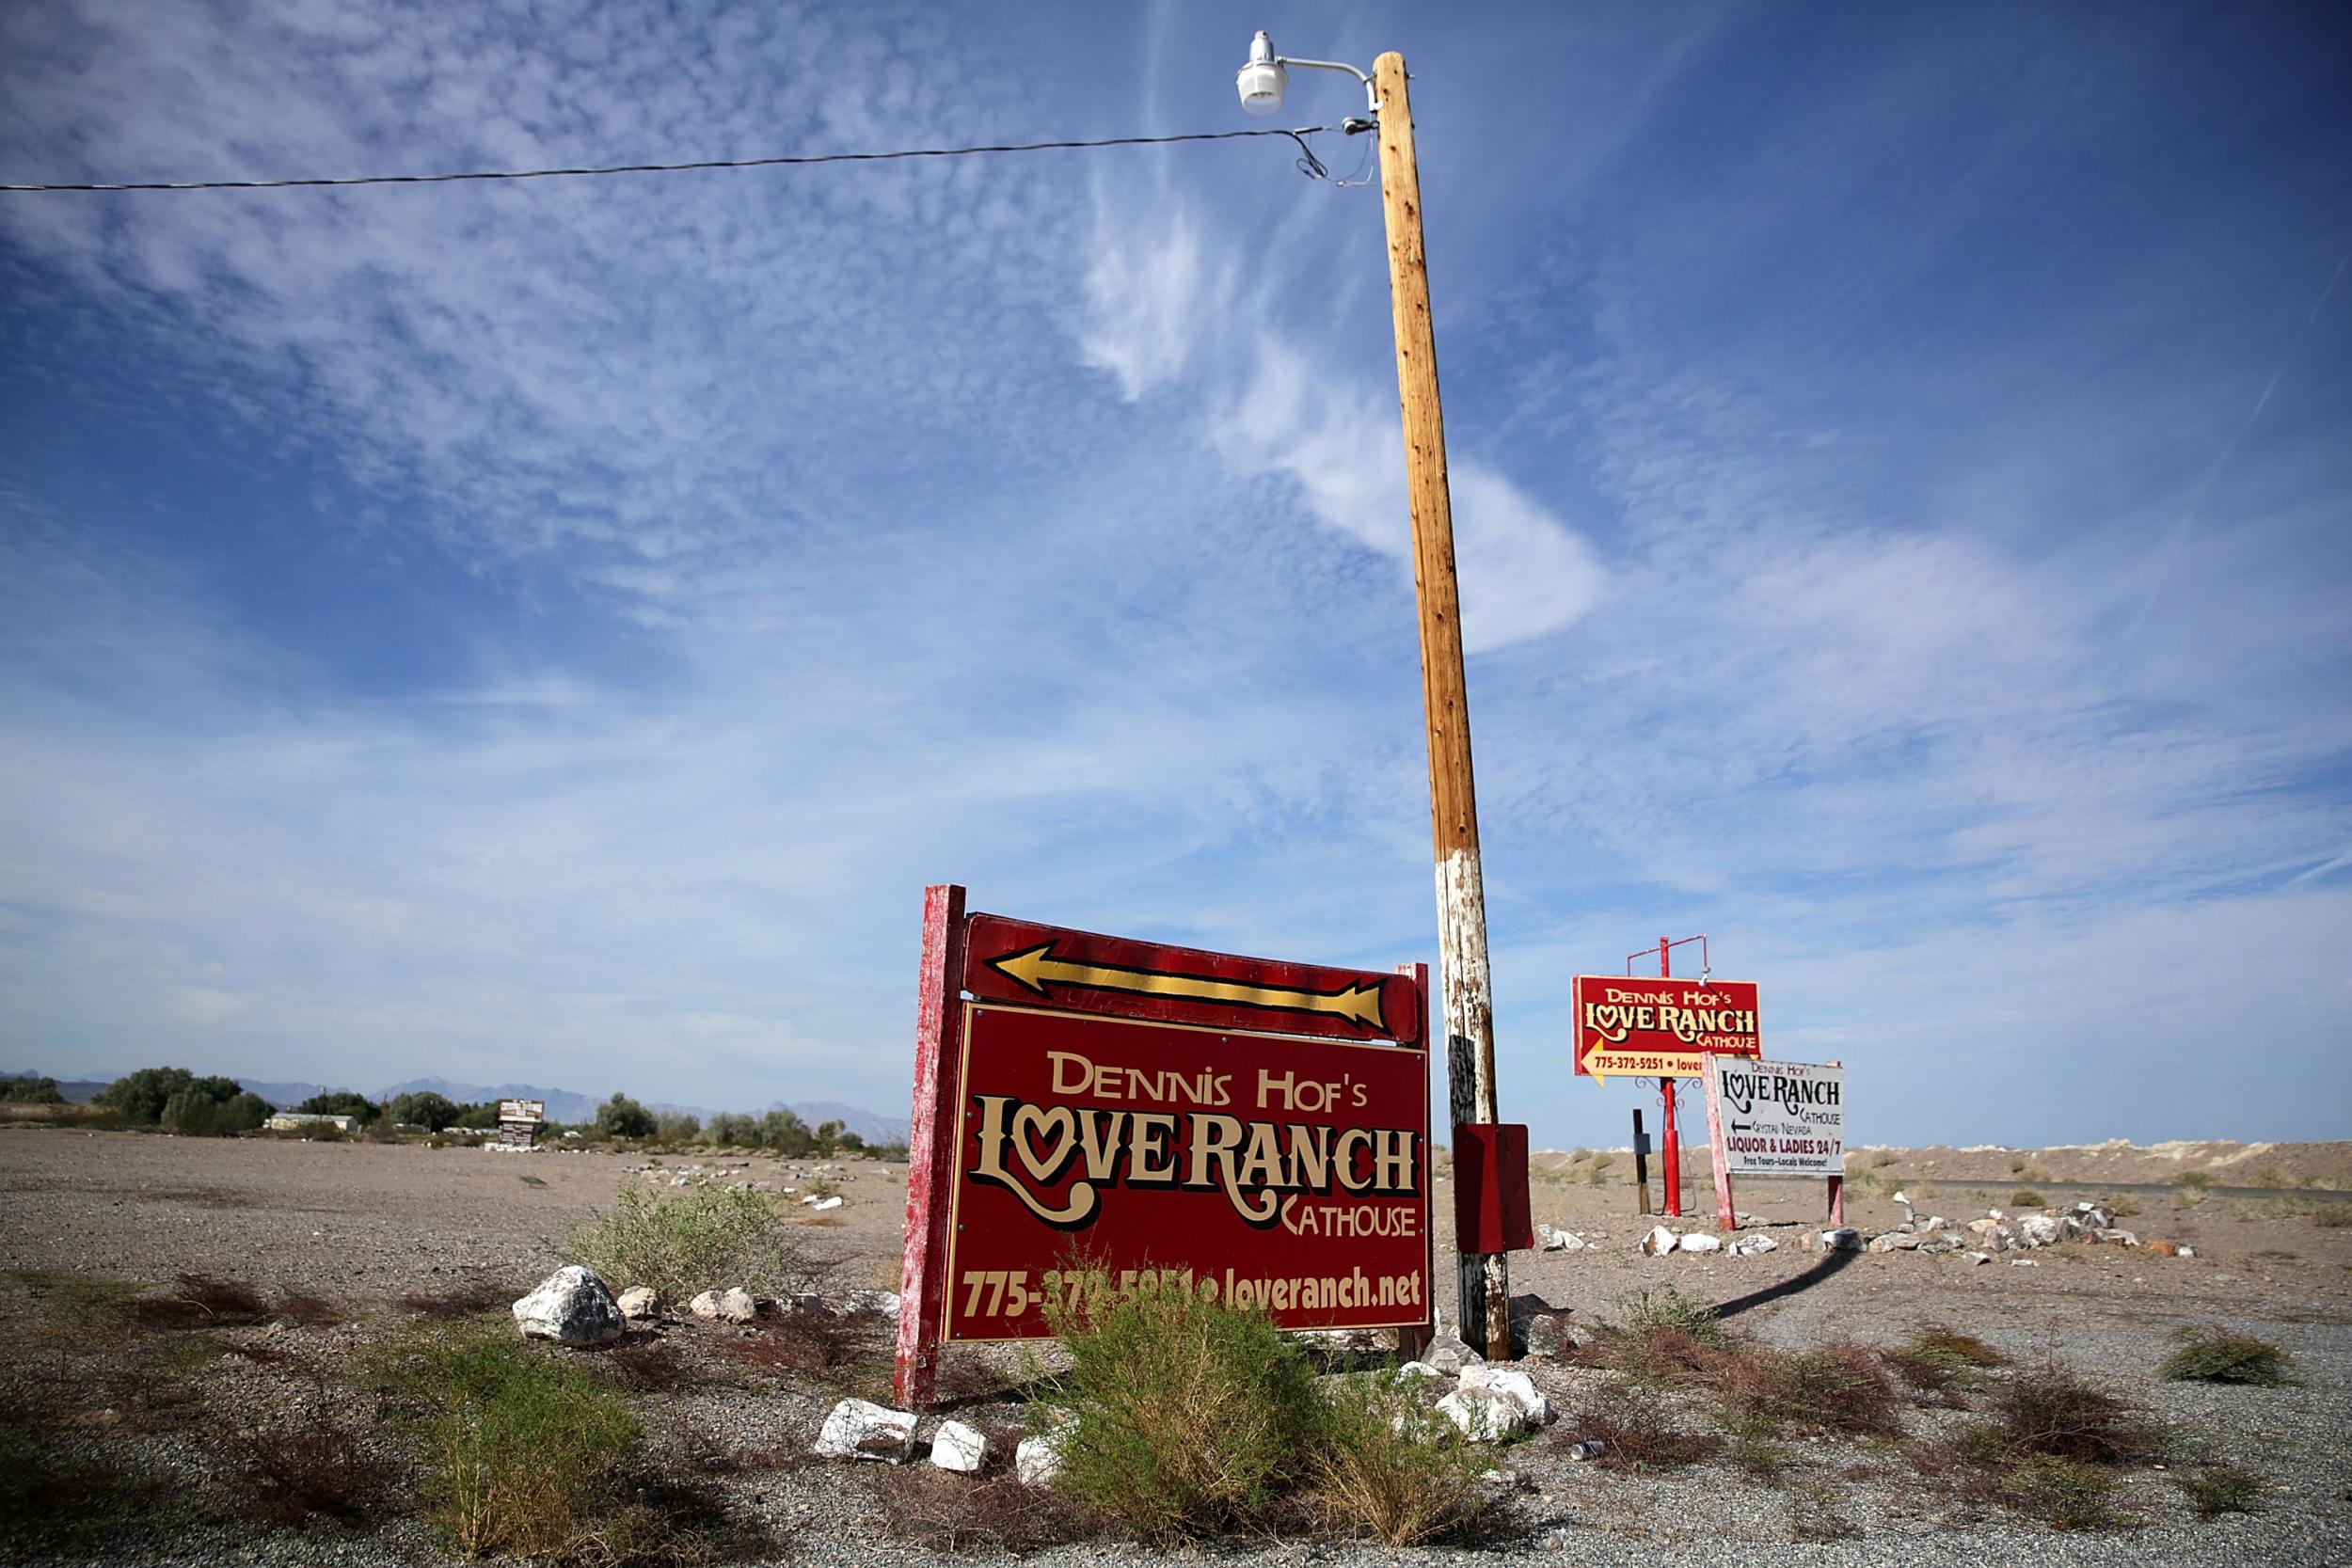 Signs for Dennis Hof's Love Ranch Las Vegas brothel are shown on October 14, 2015 in Crystal, Nevada